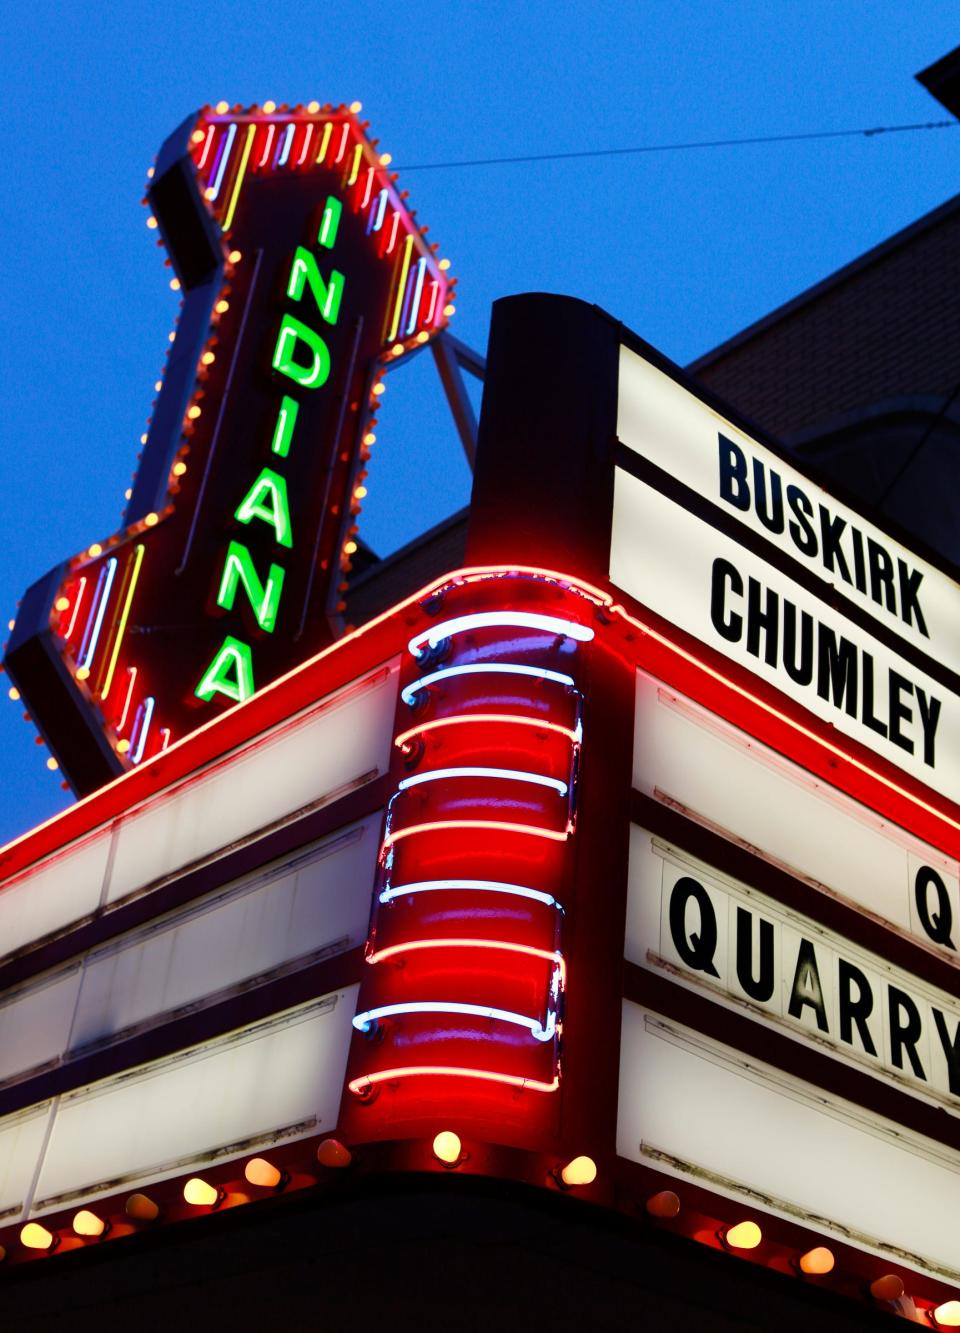 The marquee of the Buskirk-Chumley Theater is seen in 2012 during its 90th anniversary celebration.